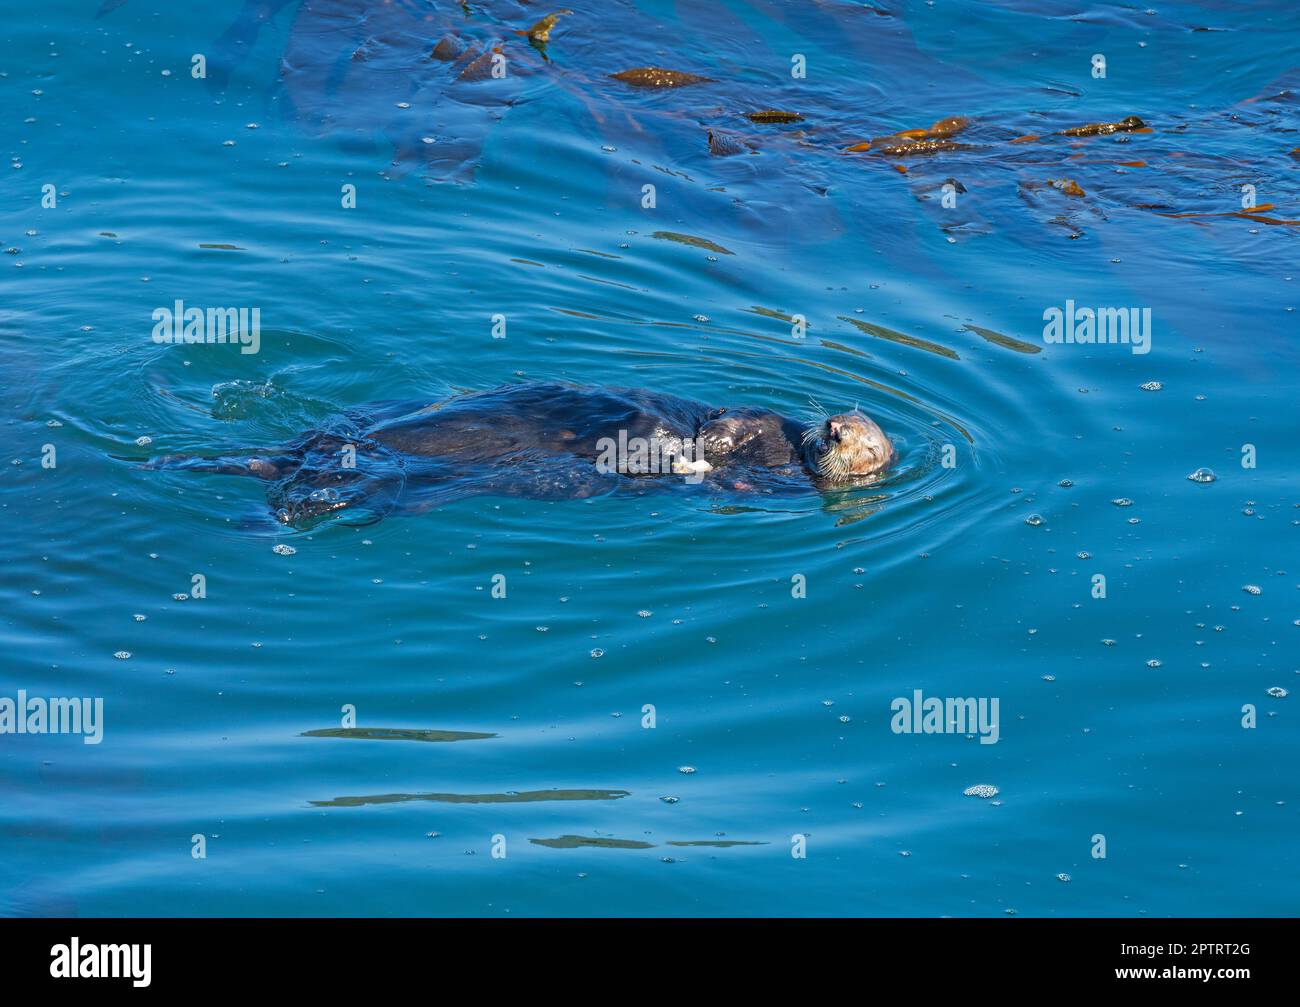 Sea Otter Swimming in Coastal Waters in the Point Lobos State Natural Reserve in California Stock Photo